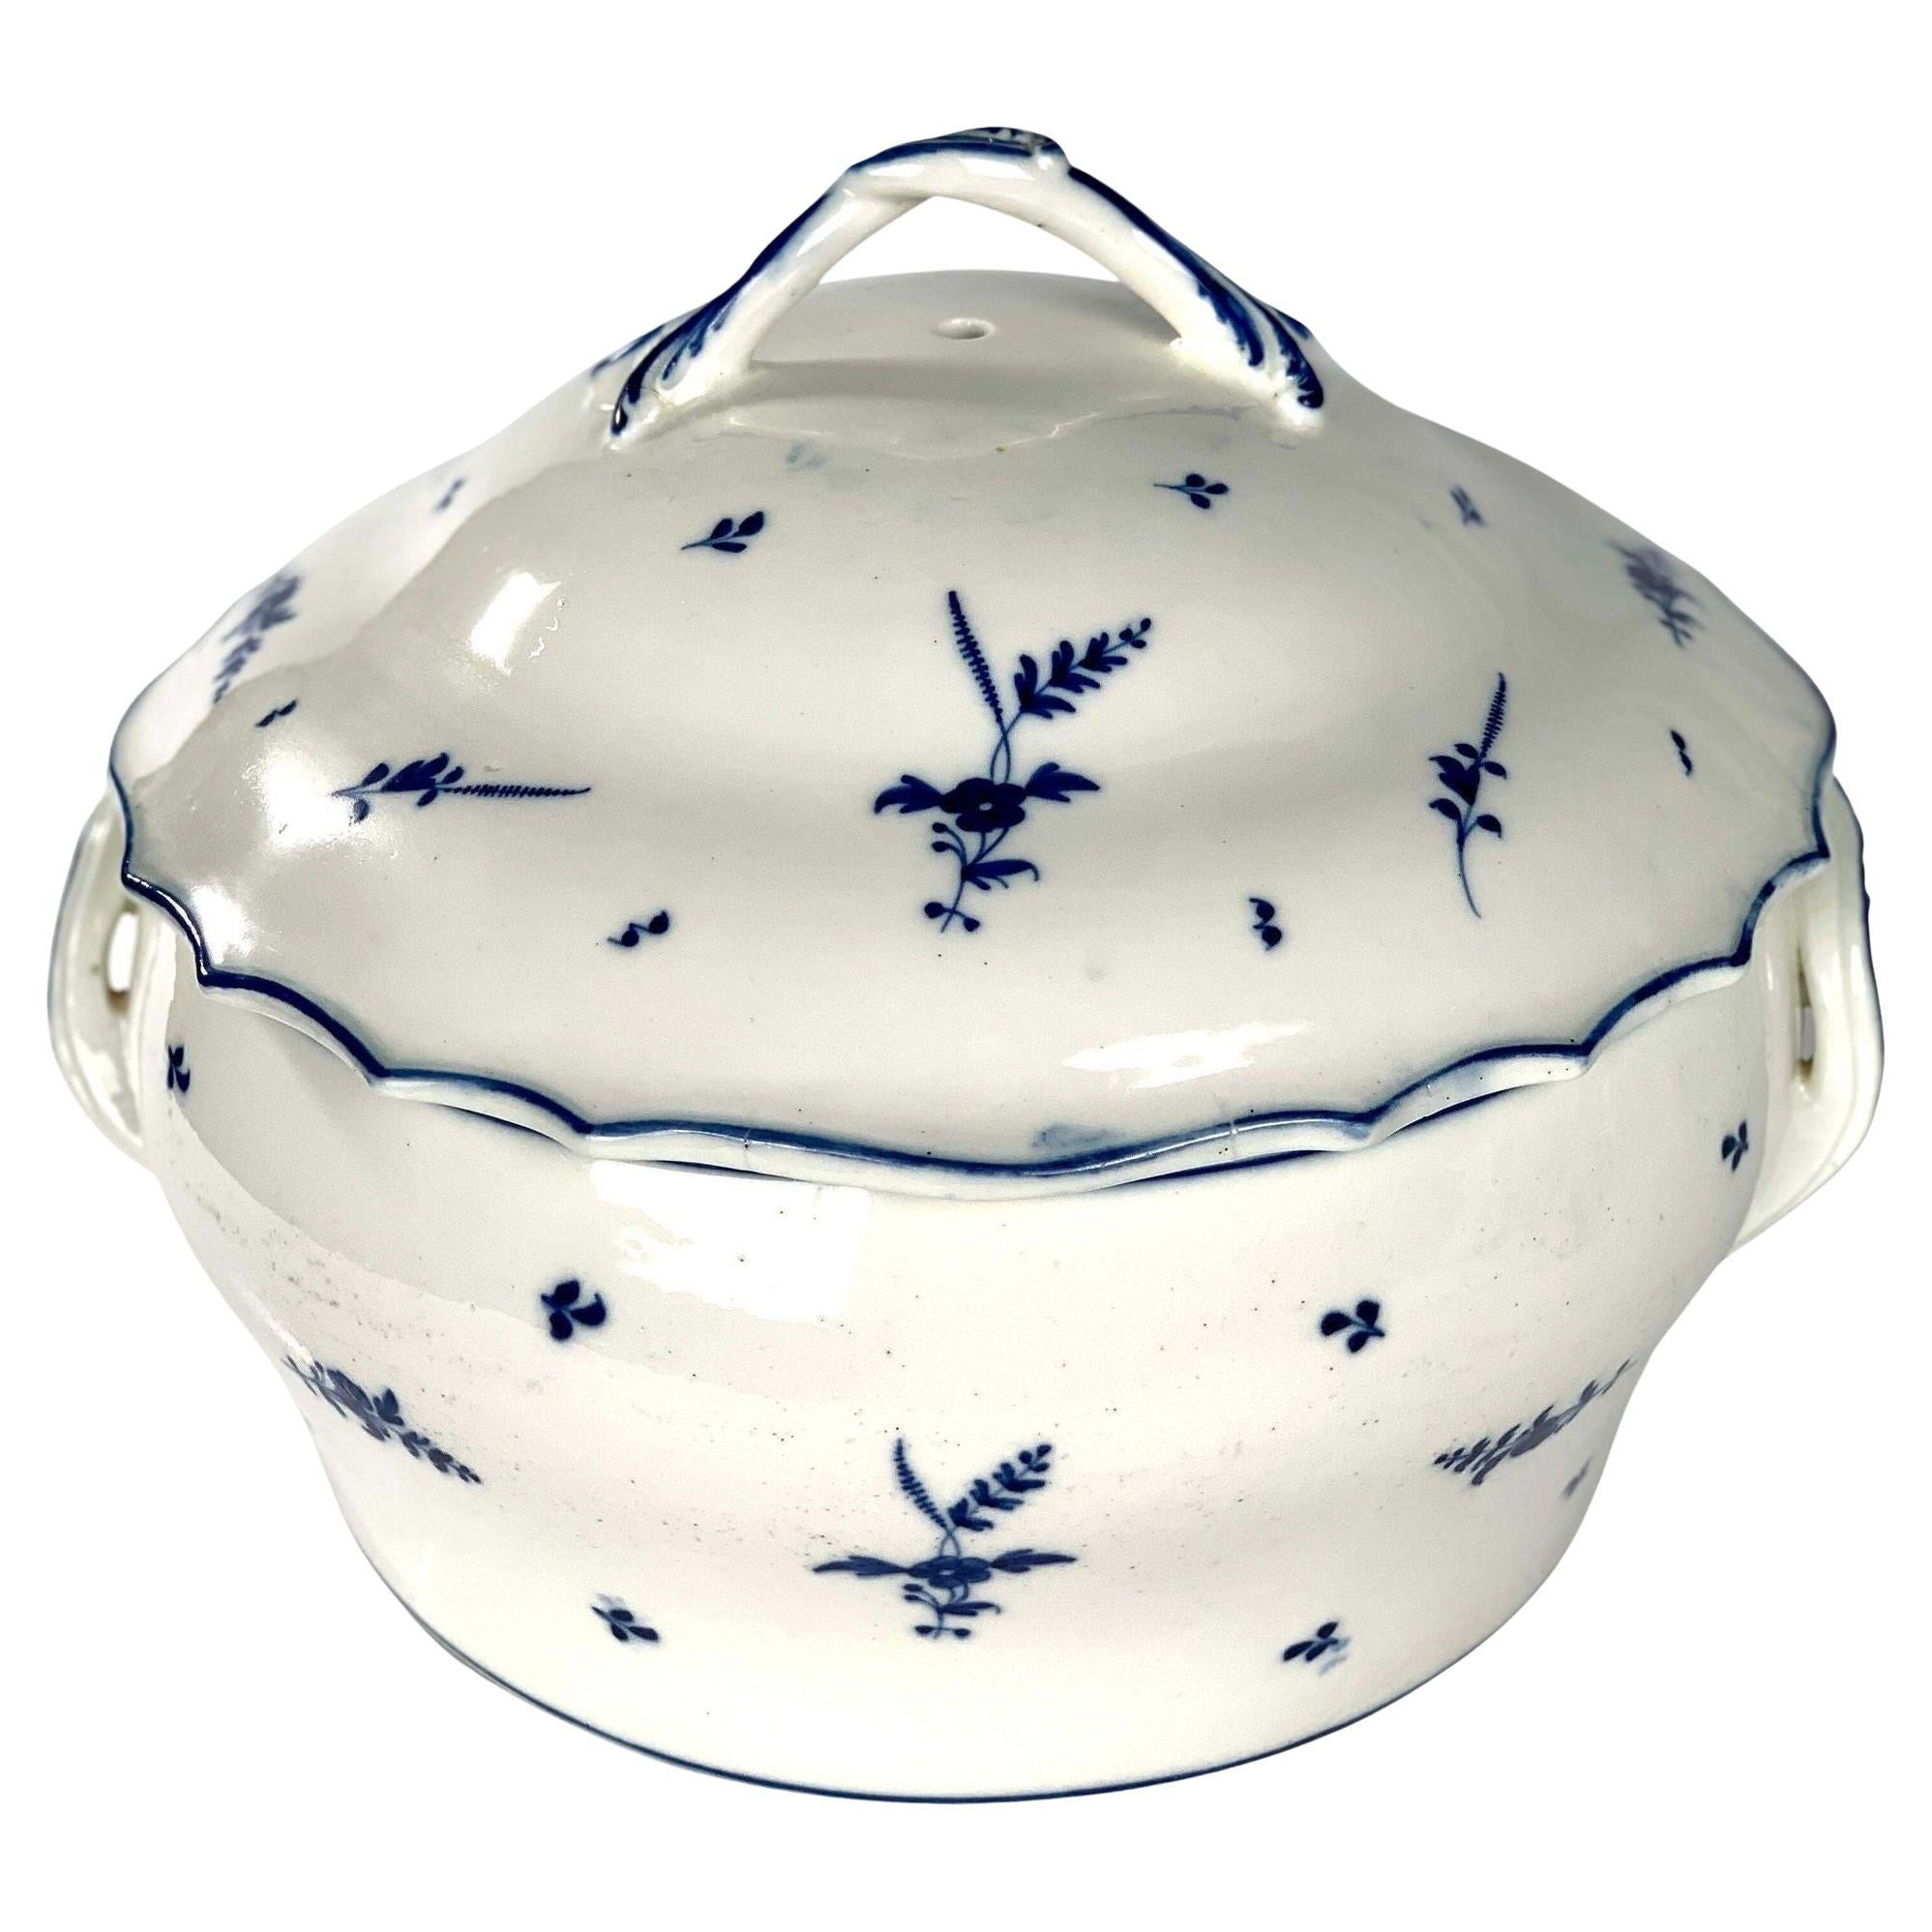 Sold at Auction: A pair of blue and white porcelain covered soup